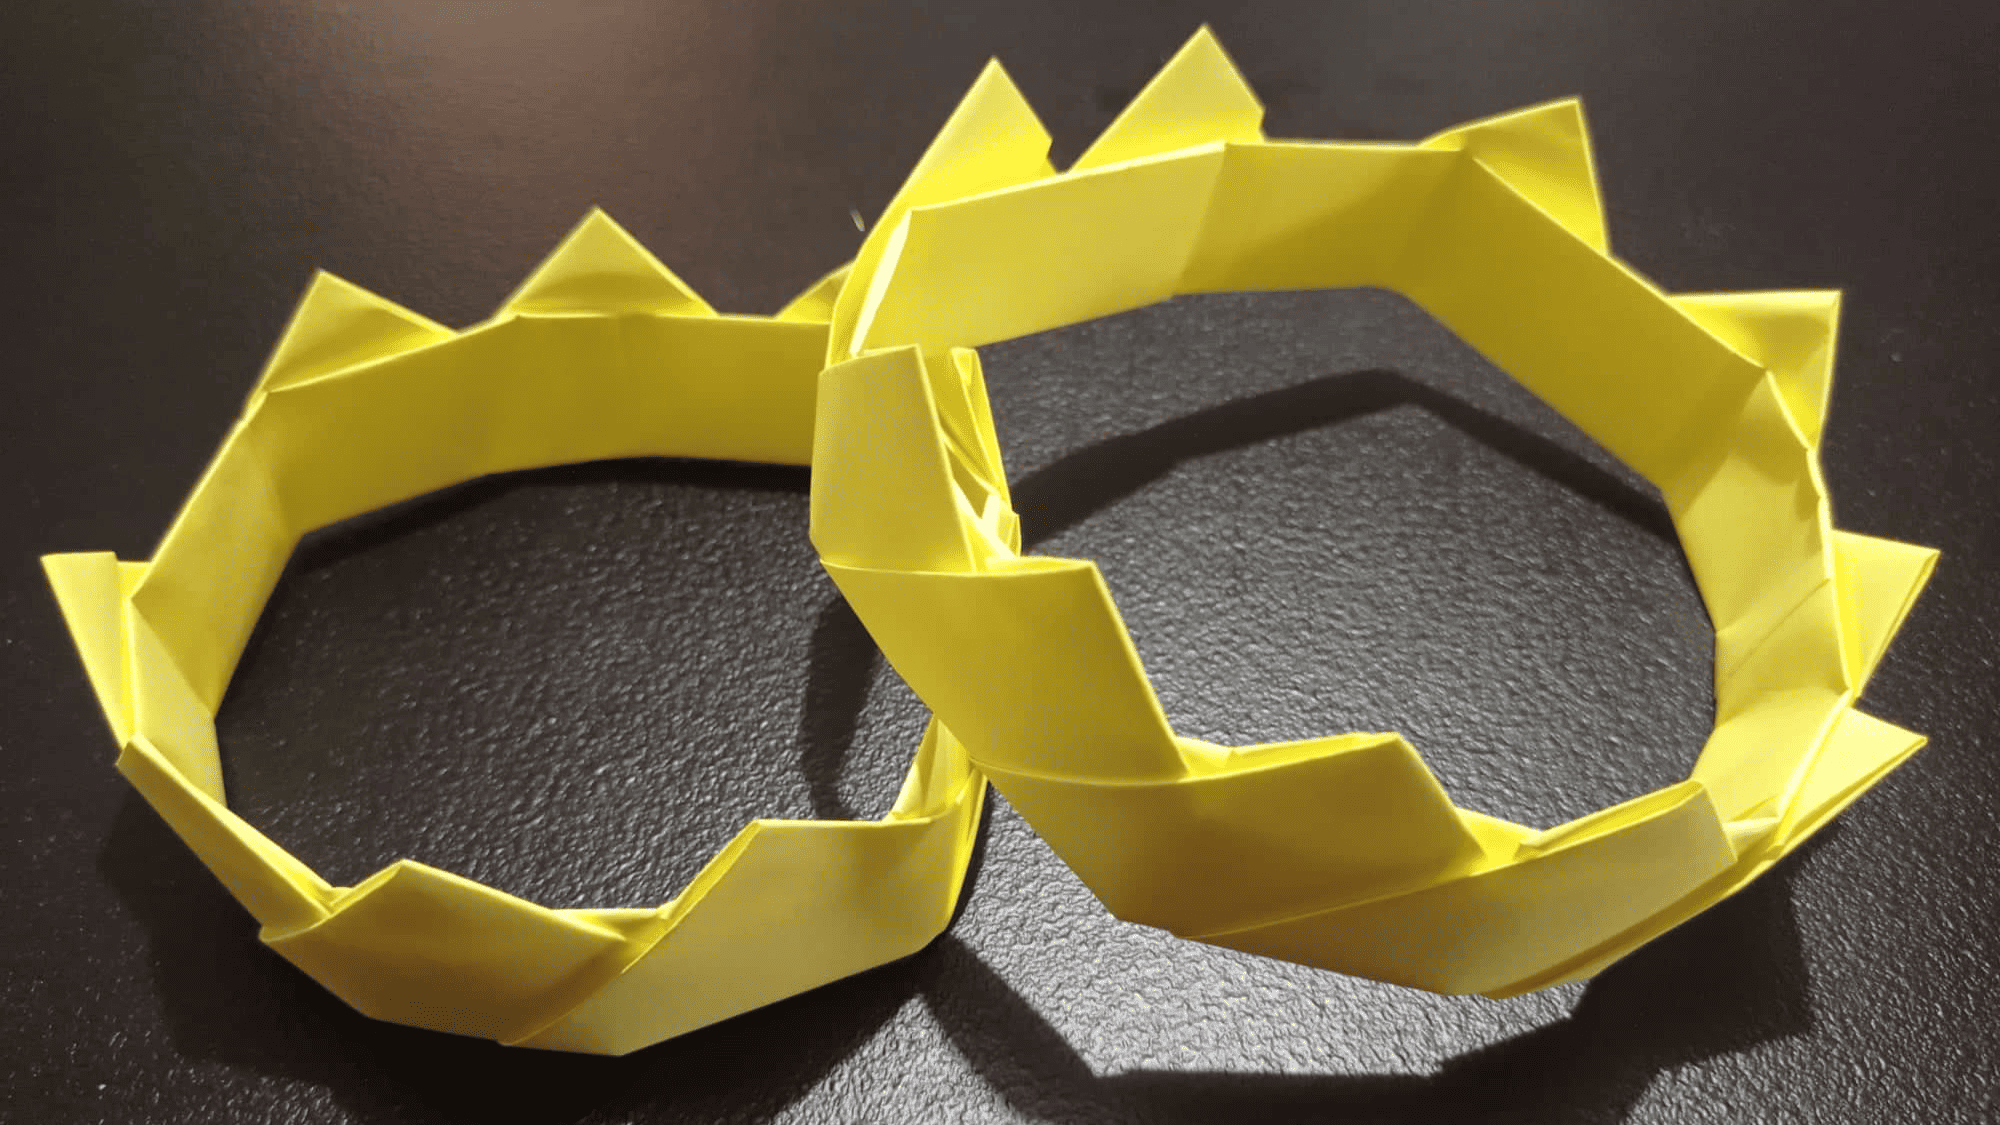 How to Make a Crown Origami Origami Crown Instructions